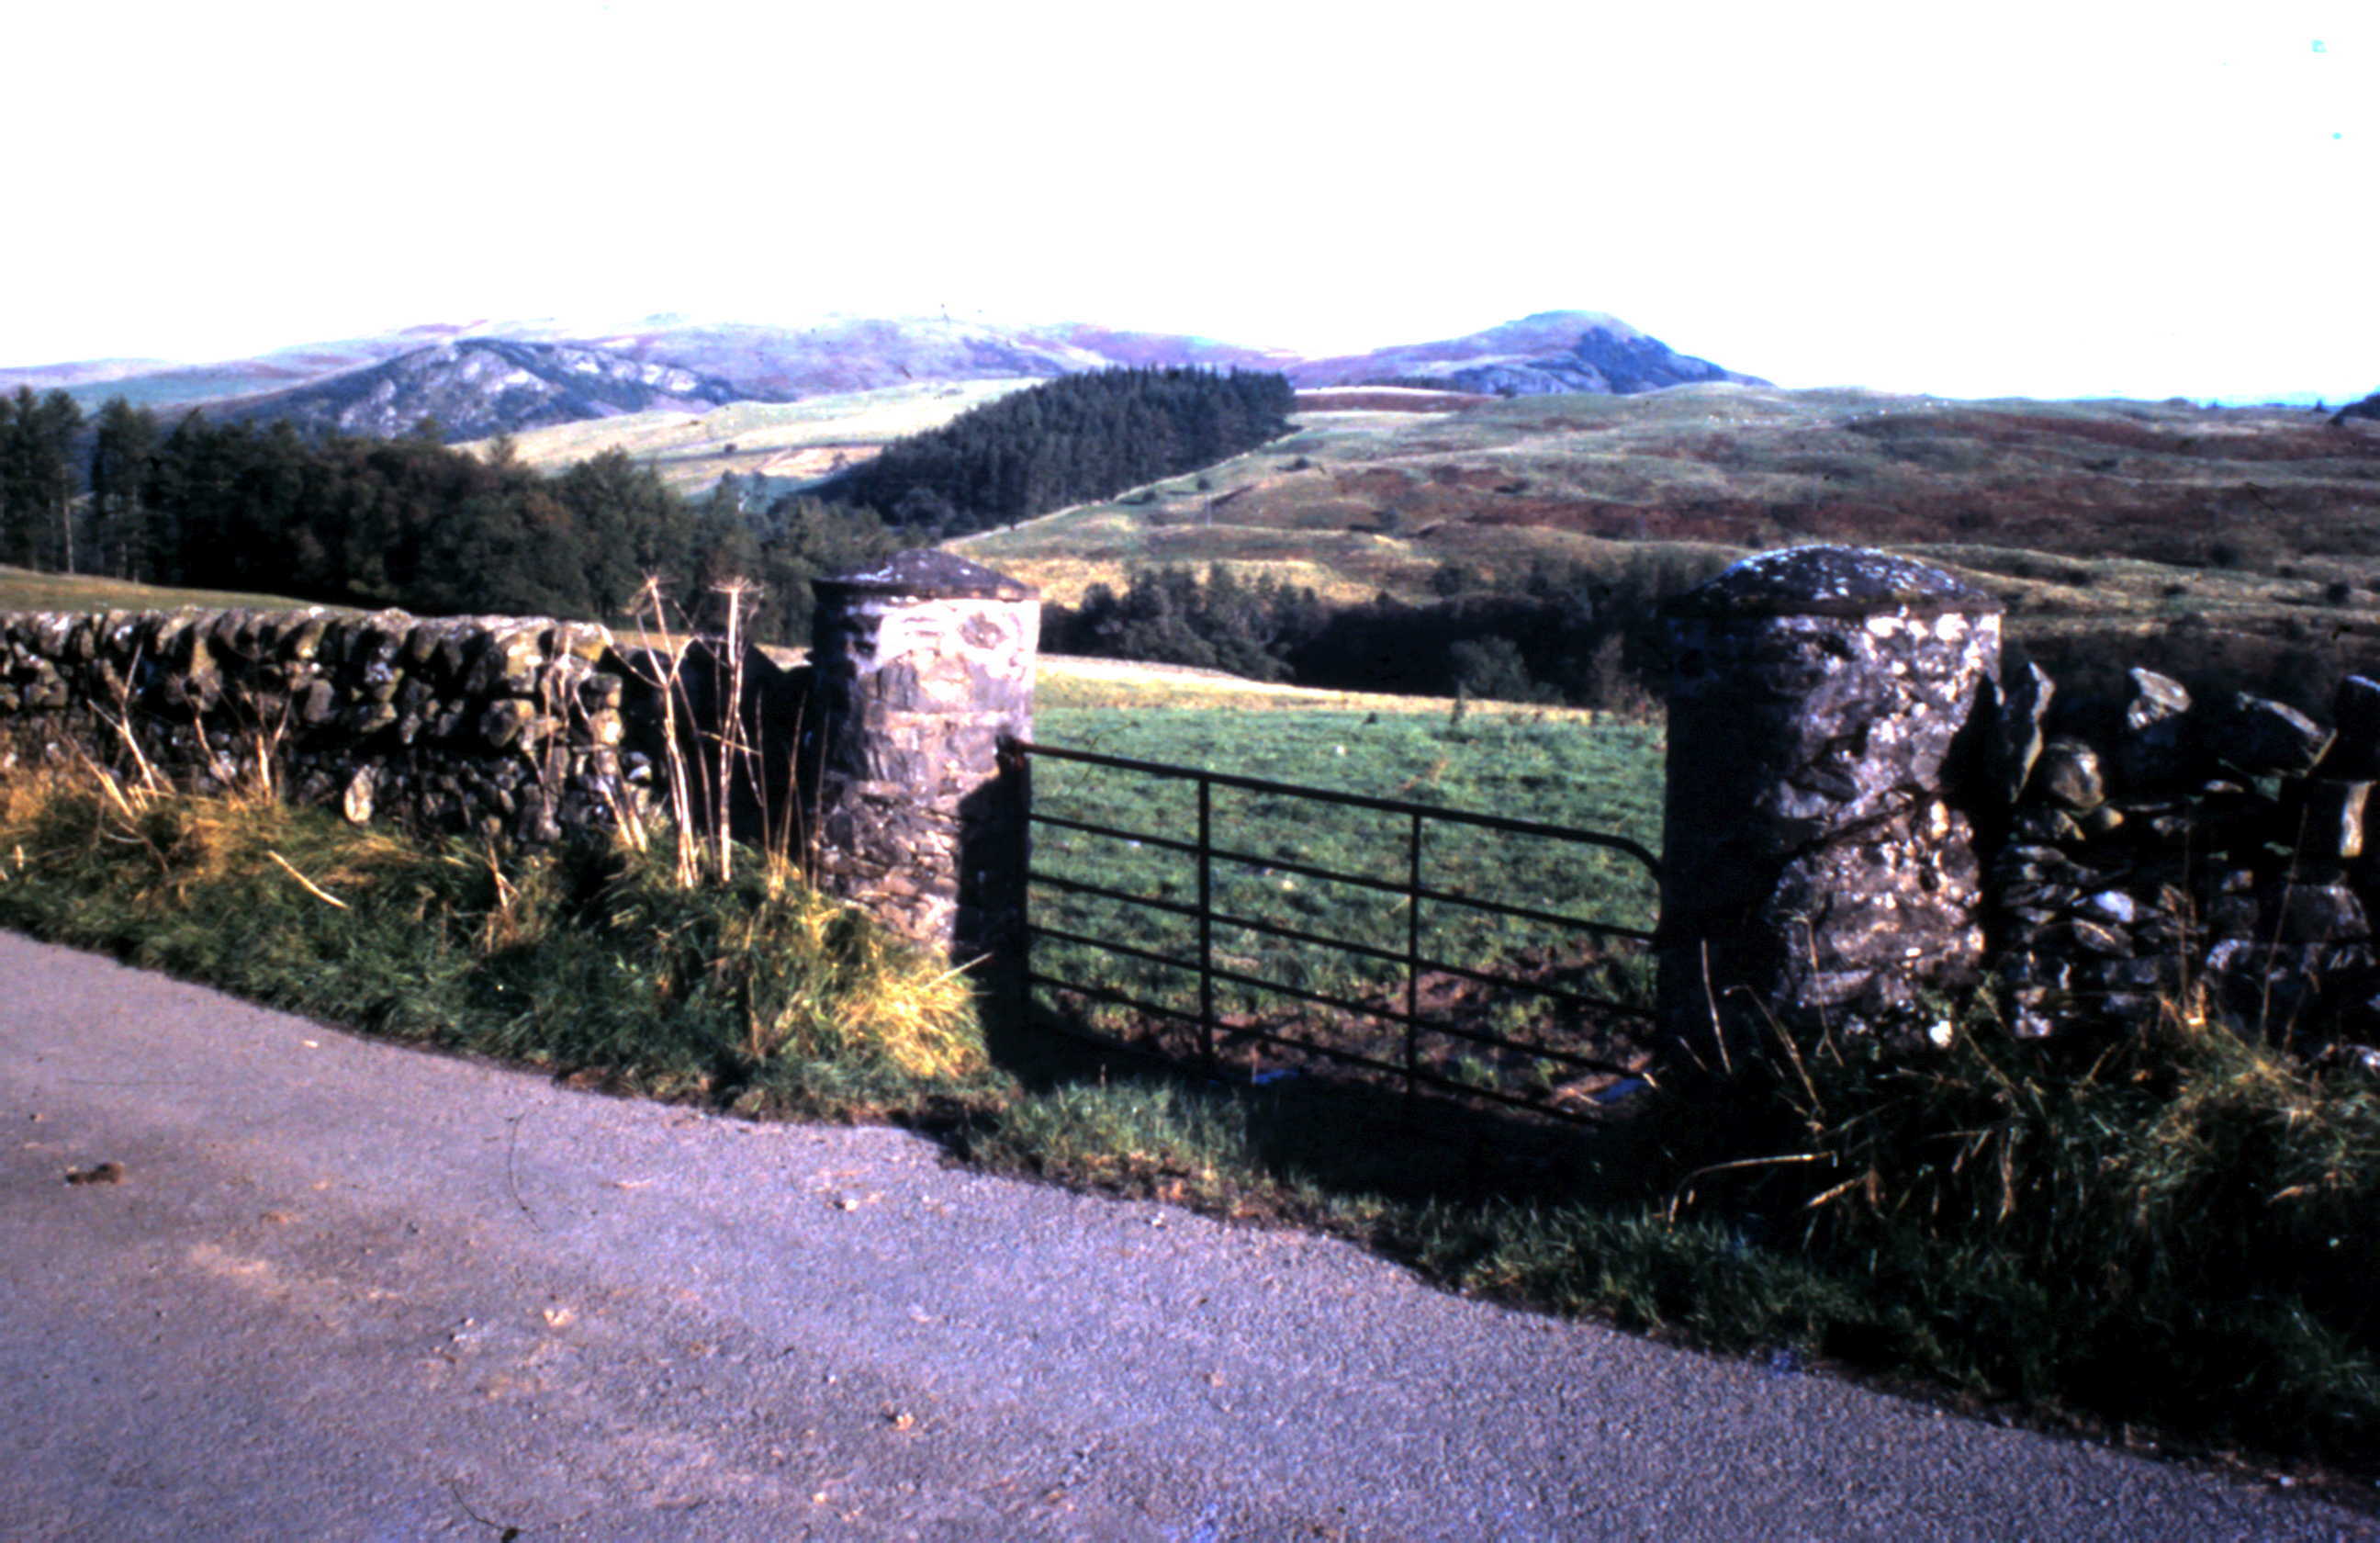 Lann Hall gateposts with Tynron Doon in the background